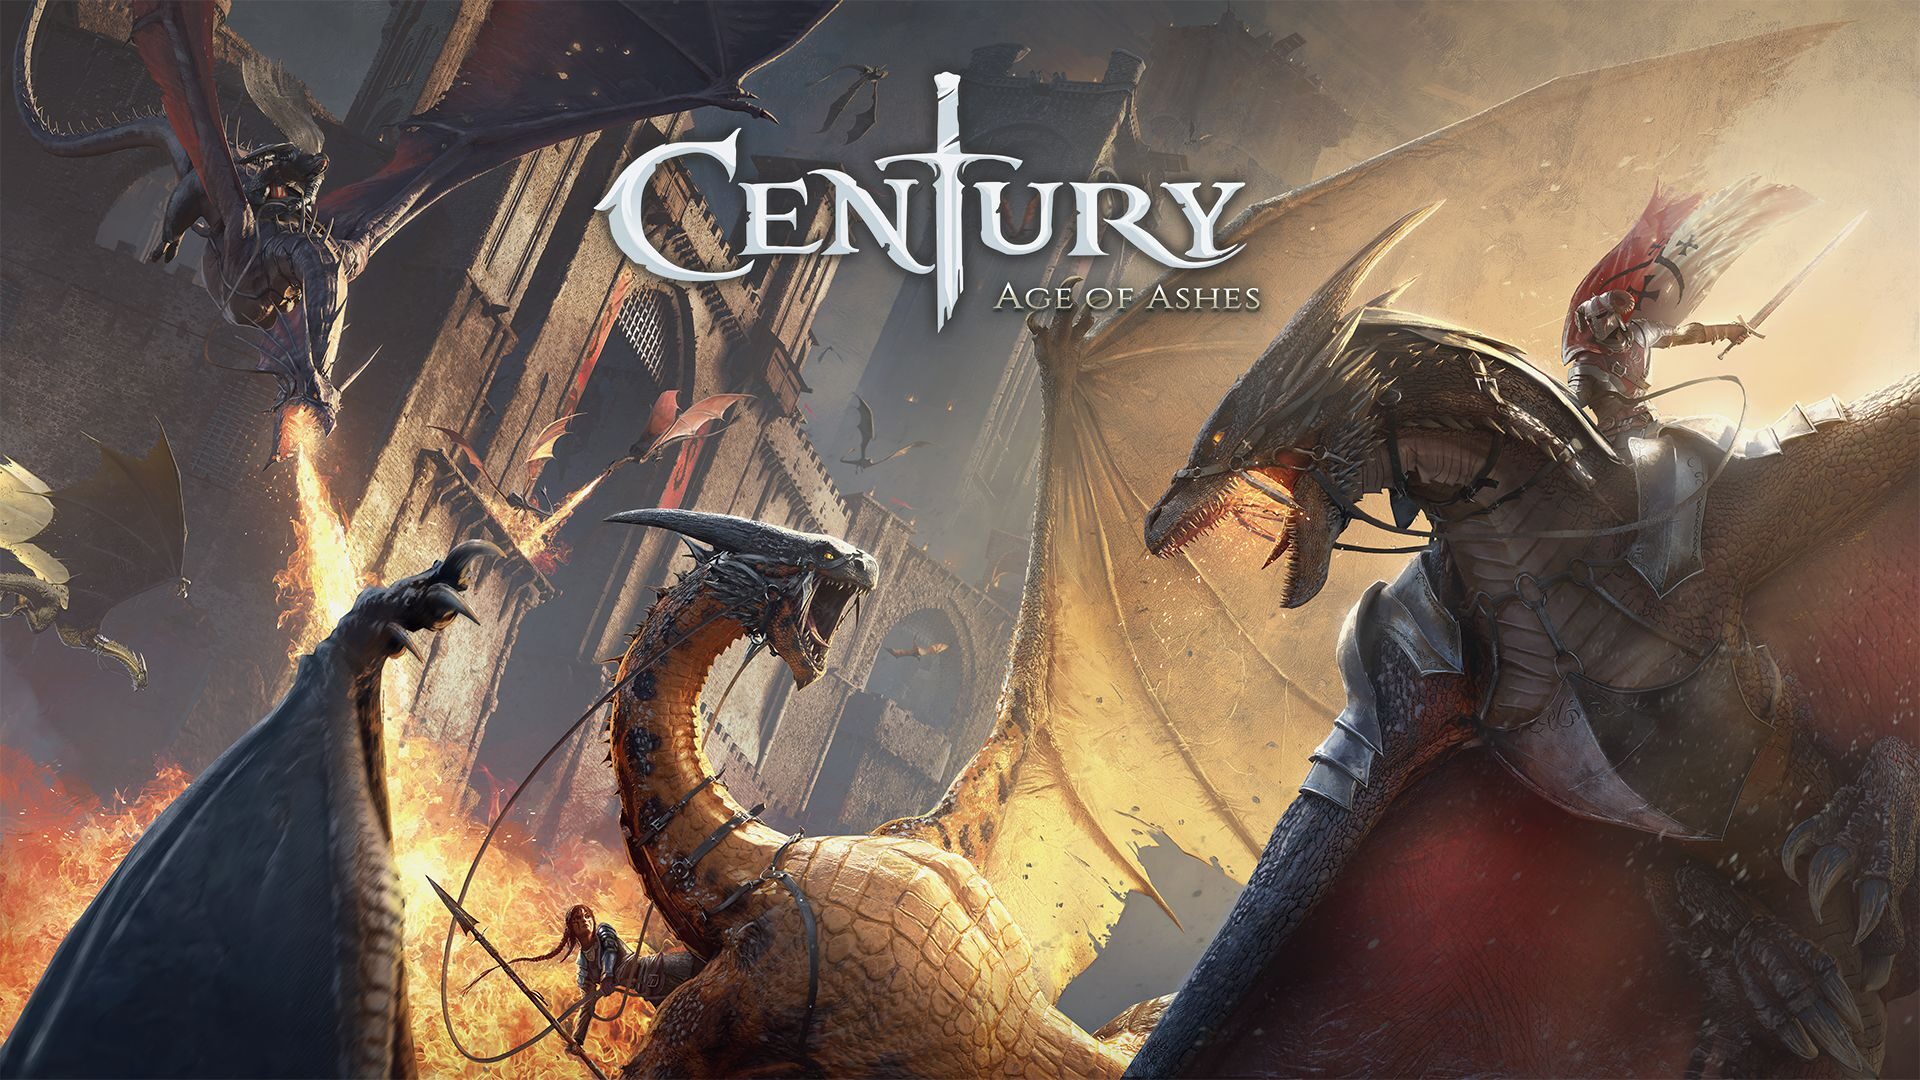 century: age of ashes ps5